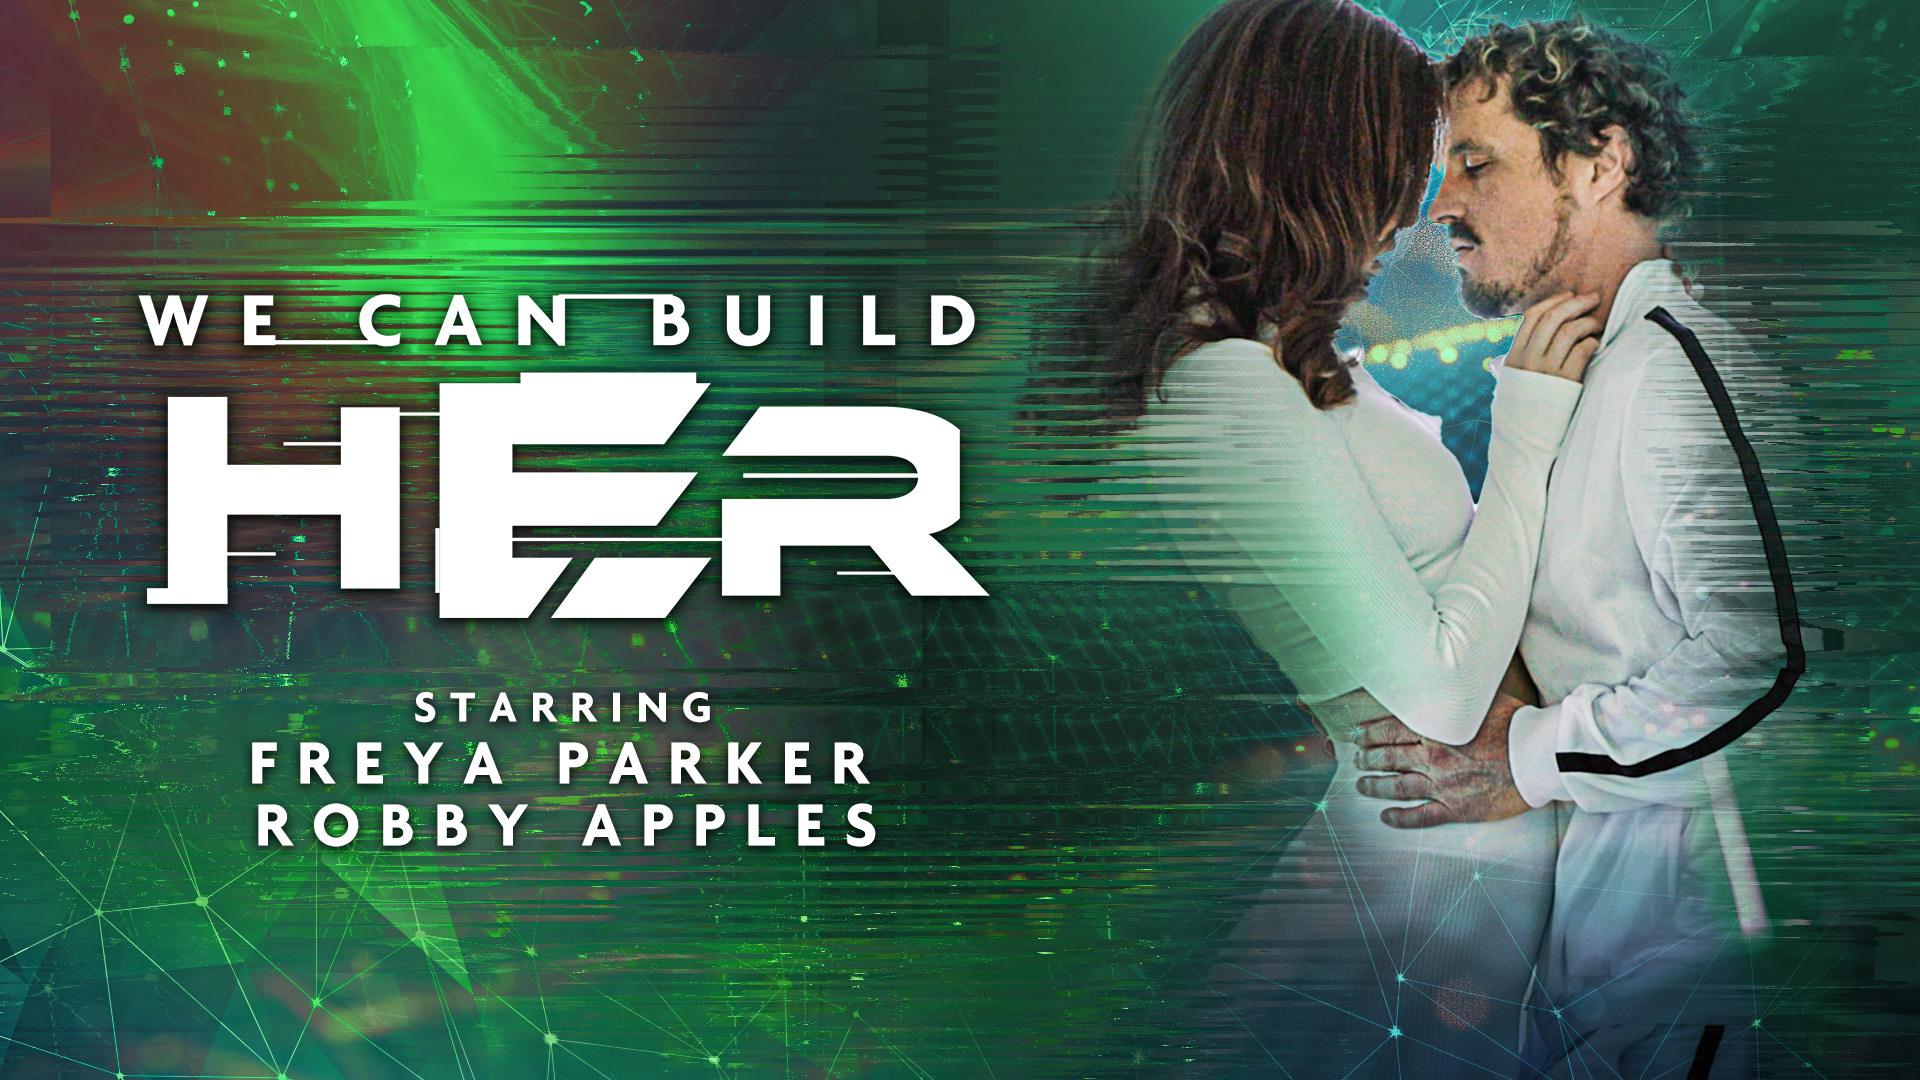 Wicked &#8211; Freya Parker &#8211; We Can Build Her S01